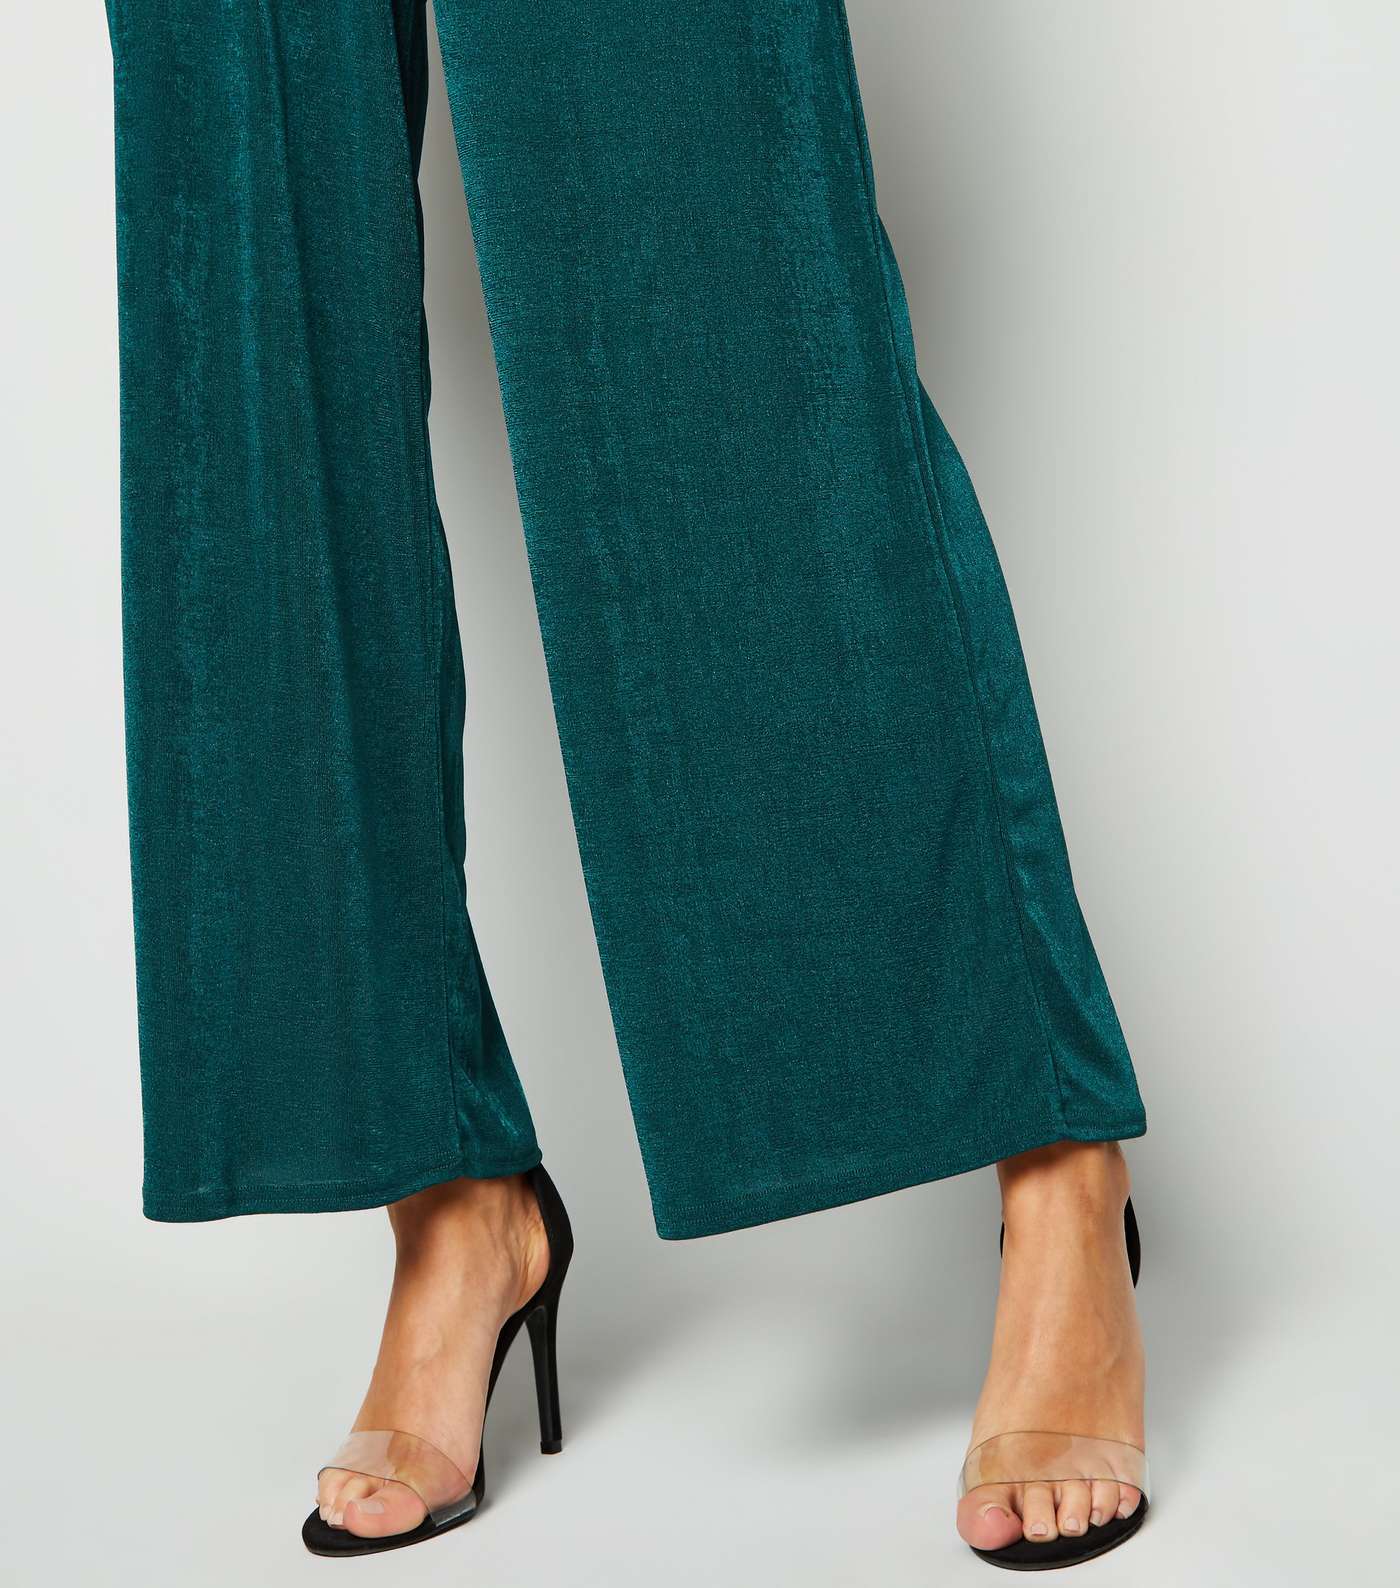 Urban Bliss Teal High Shine Trousers Image 5